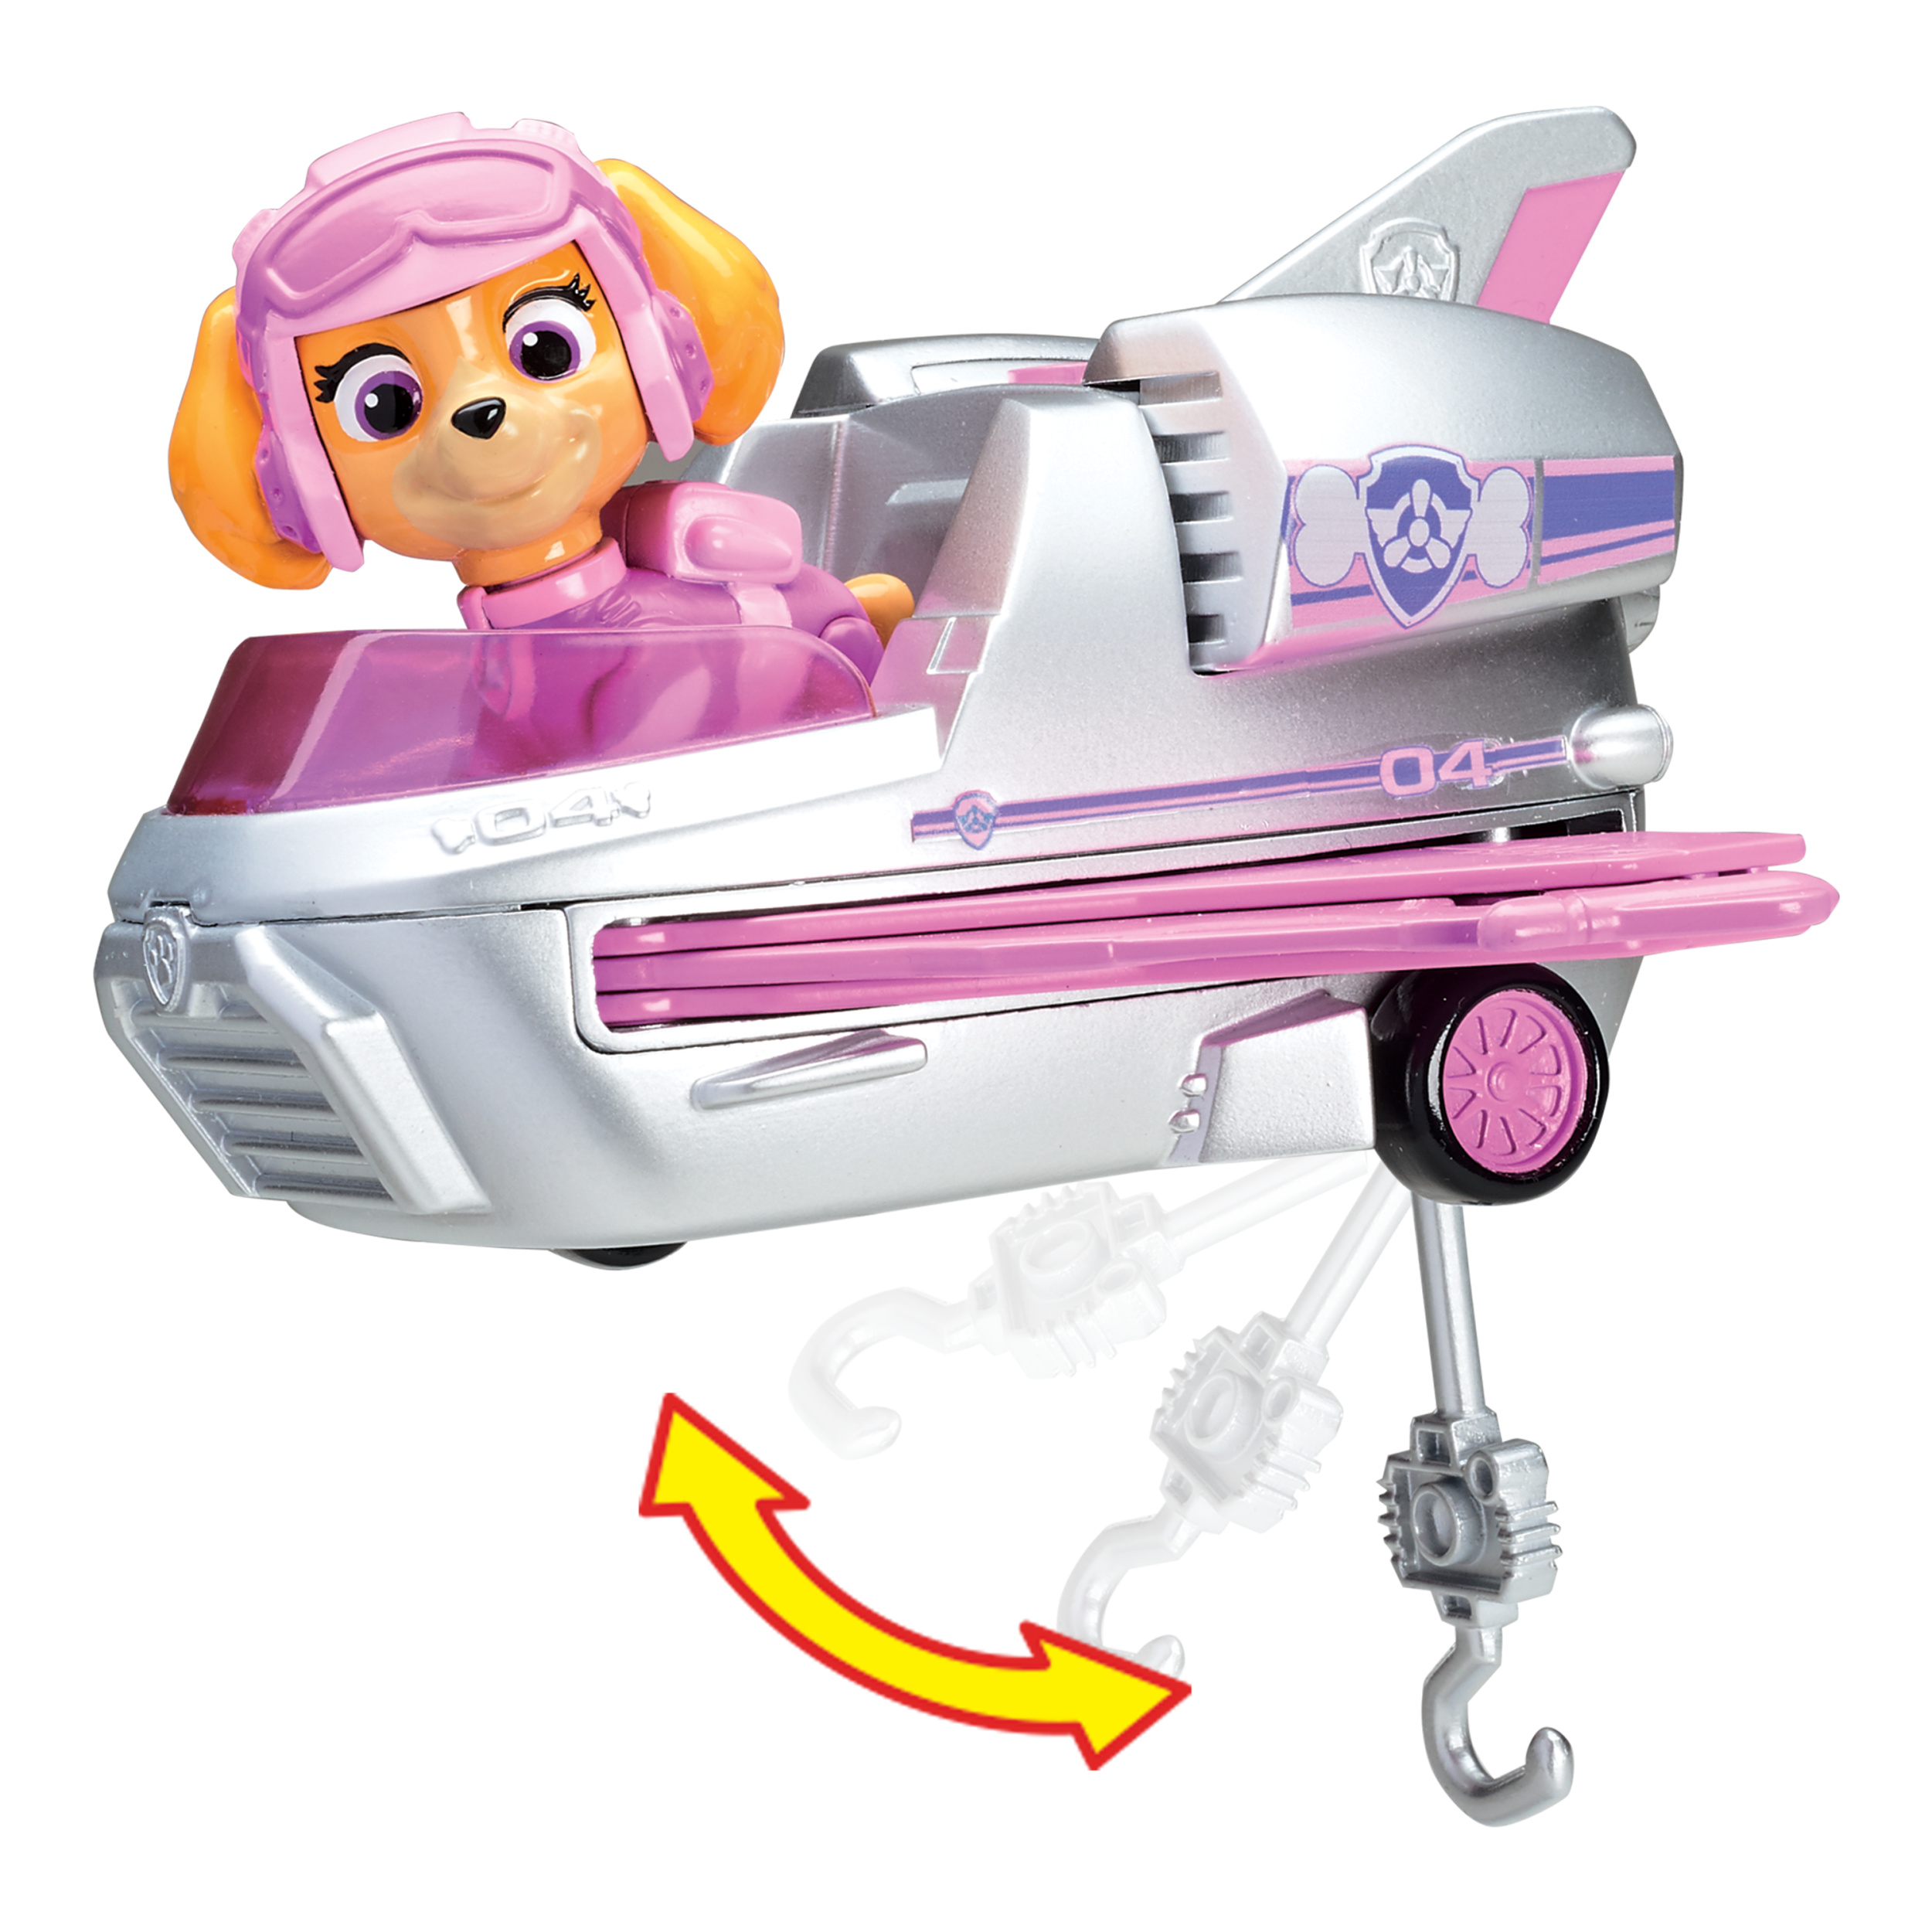 PAW Patrol Skye’s Rescue Jet with Extendable Wings Play Vehicle - image 5 of 5